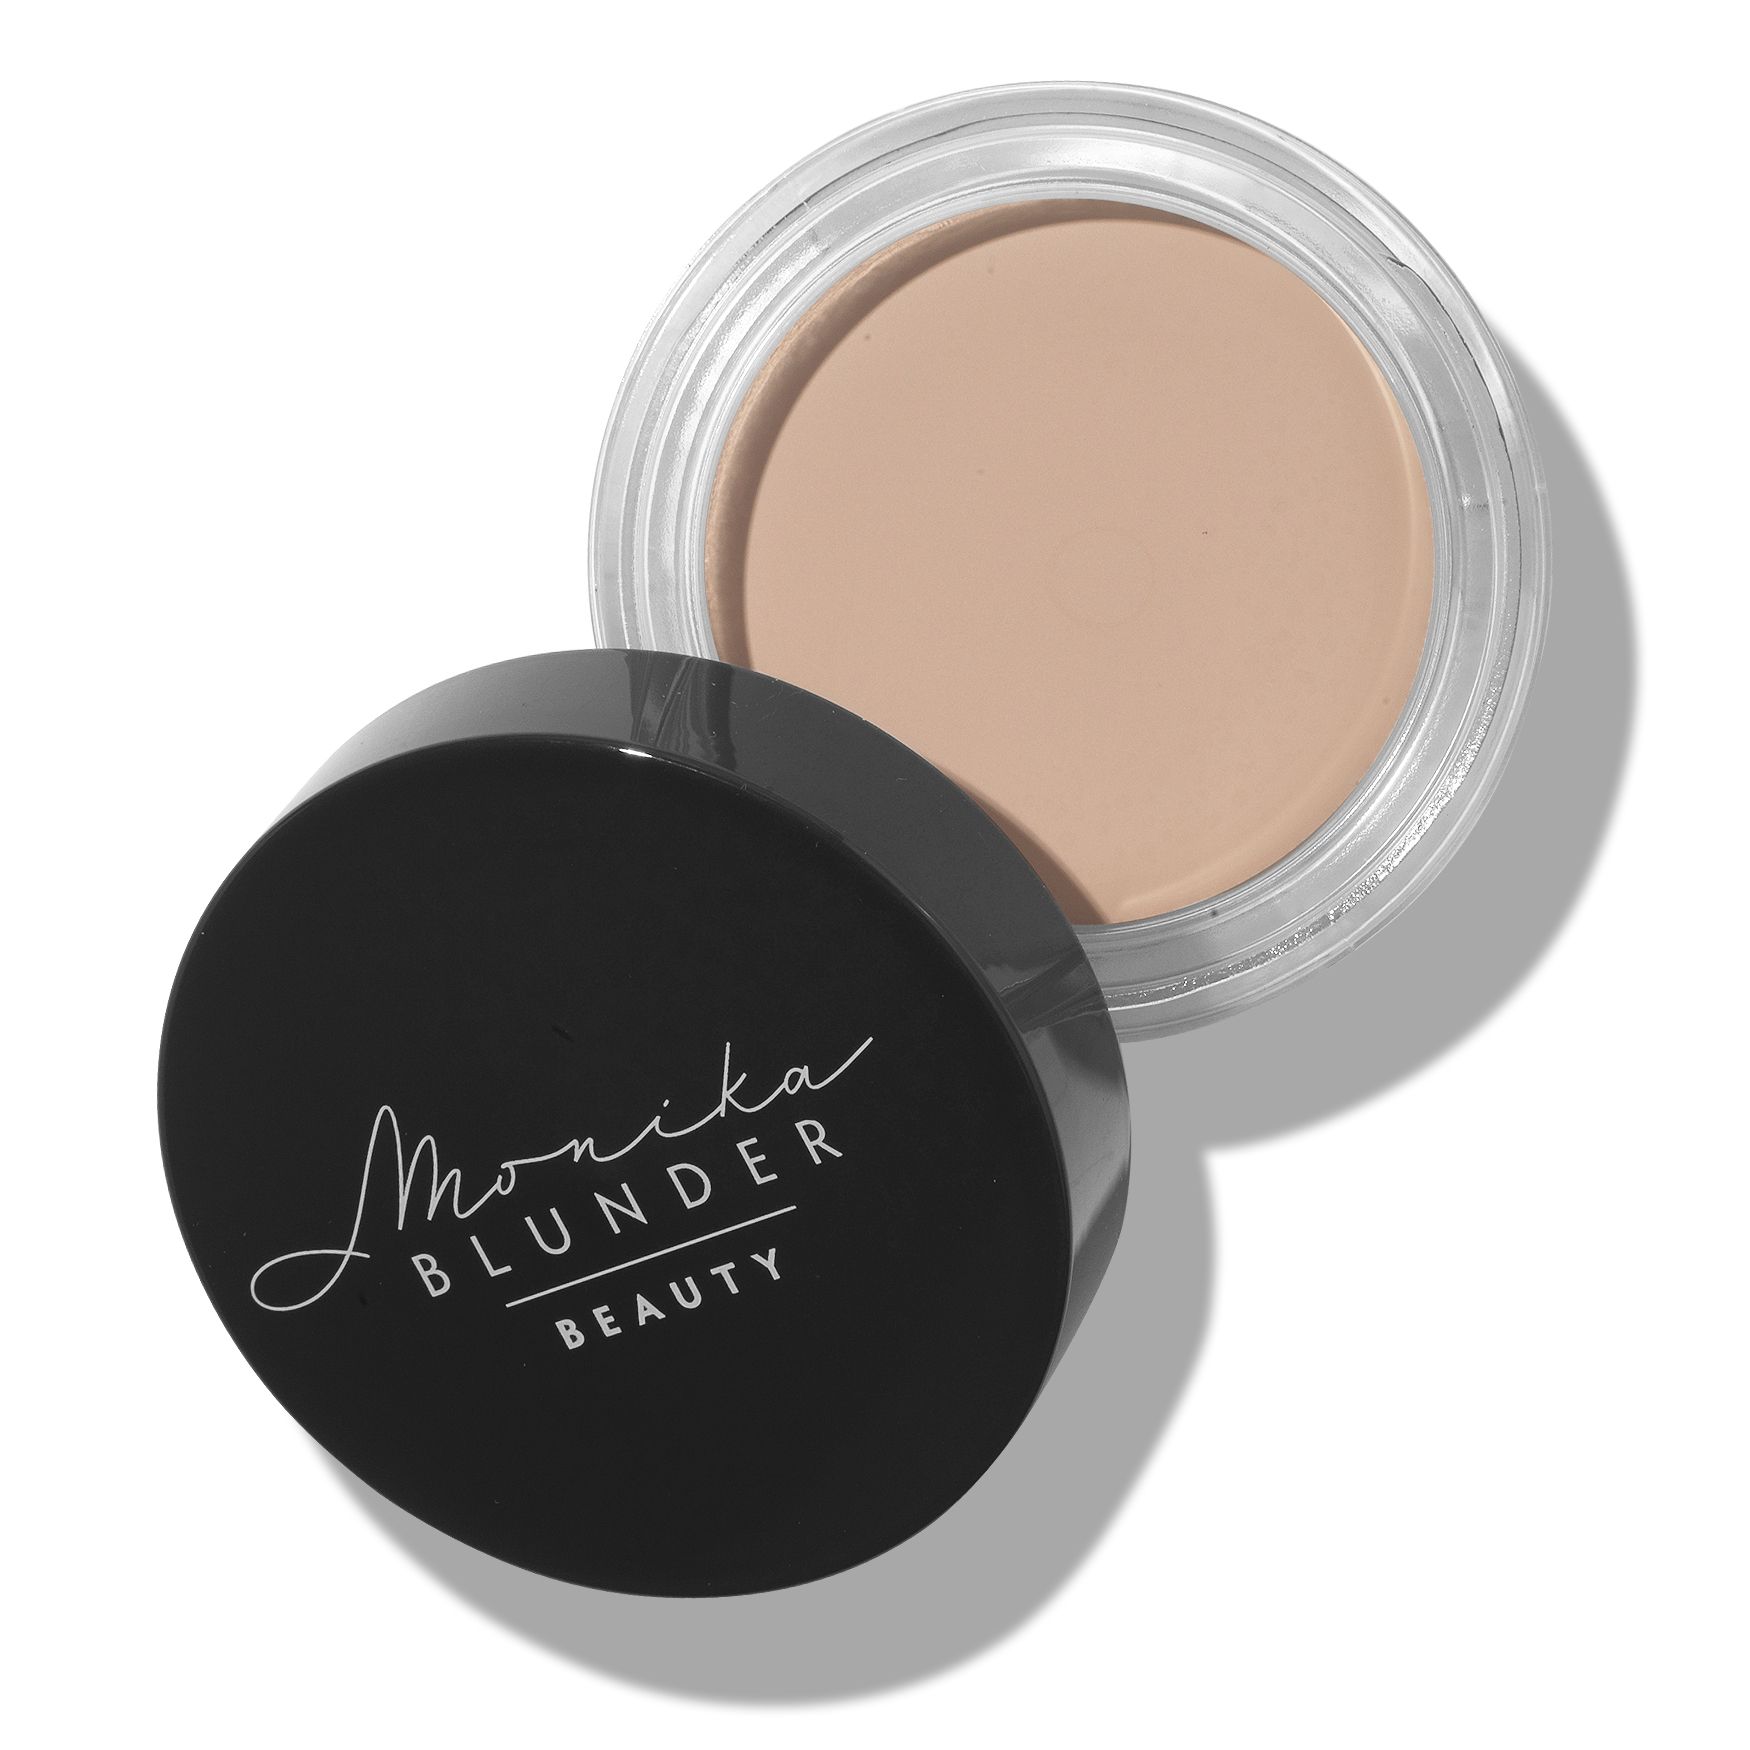 Monika Blunder Beauty Cover Foundation/Concealer | Space NK | Space NK (EU)